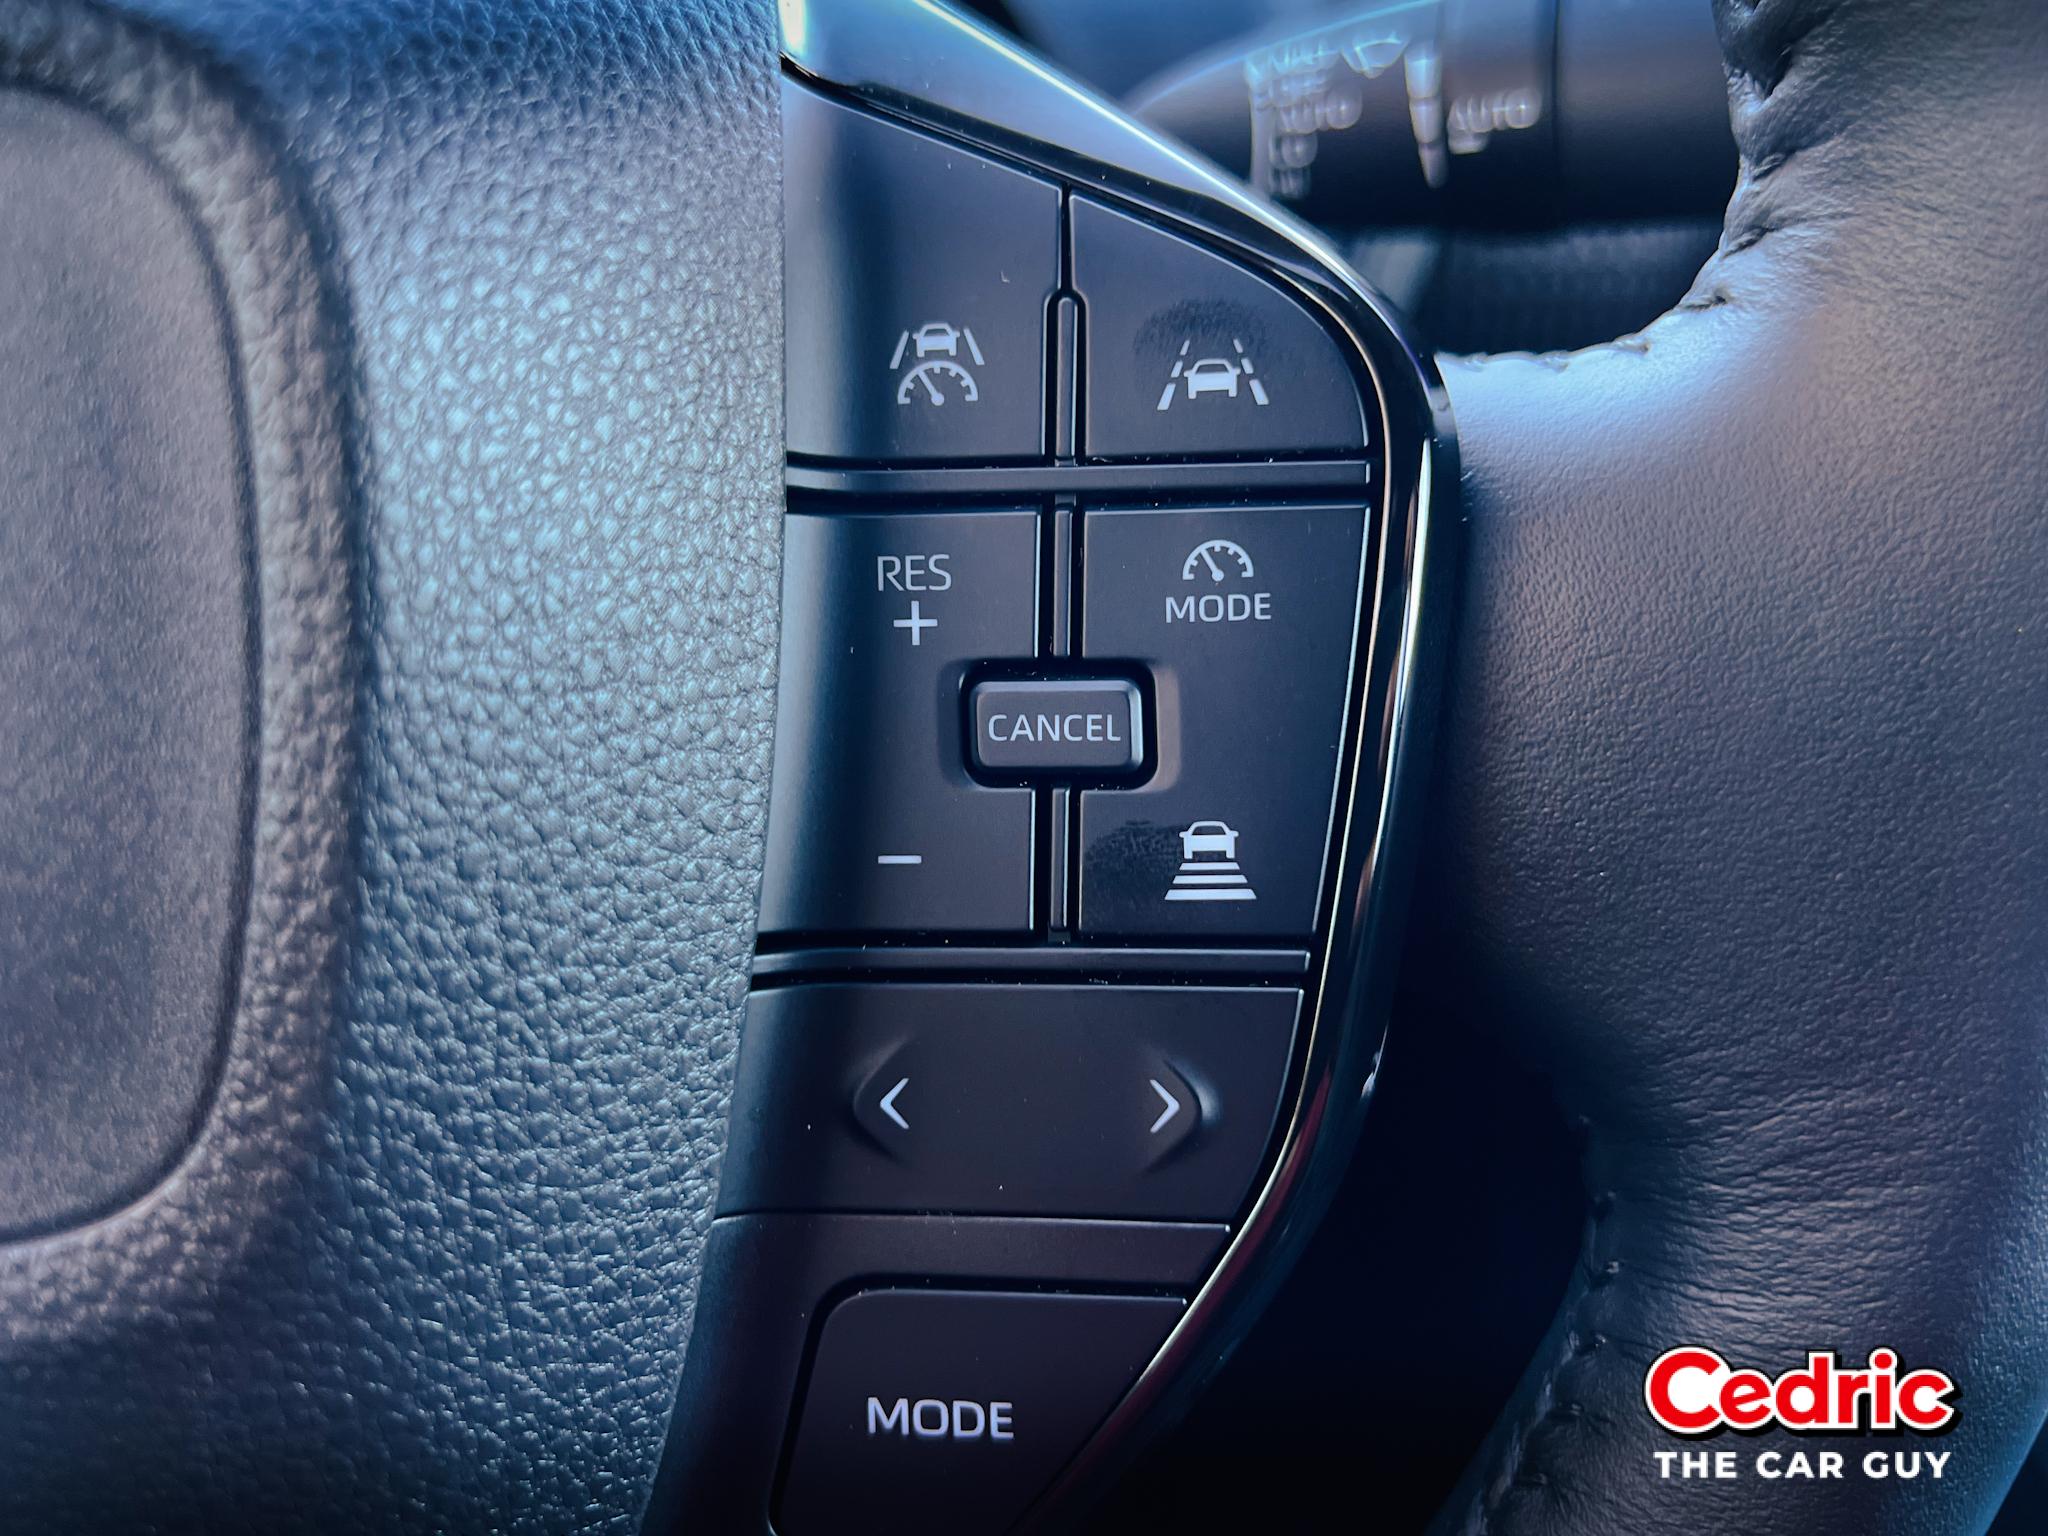 The steering wheel console controls Adaptive Cruise modes. Alos toggles the Lane Departure Alert and LTA.